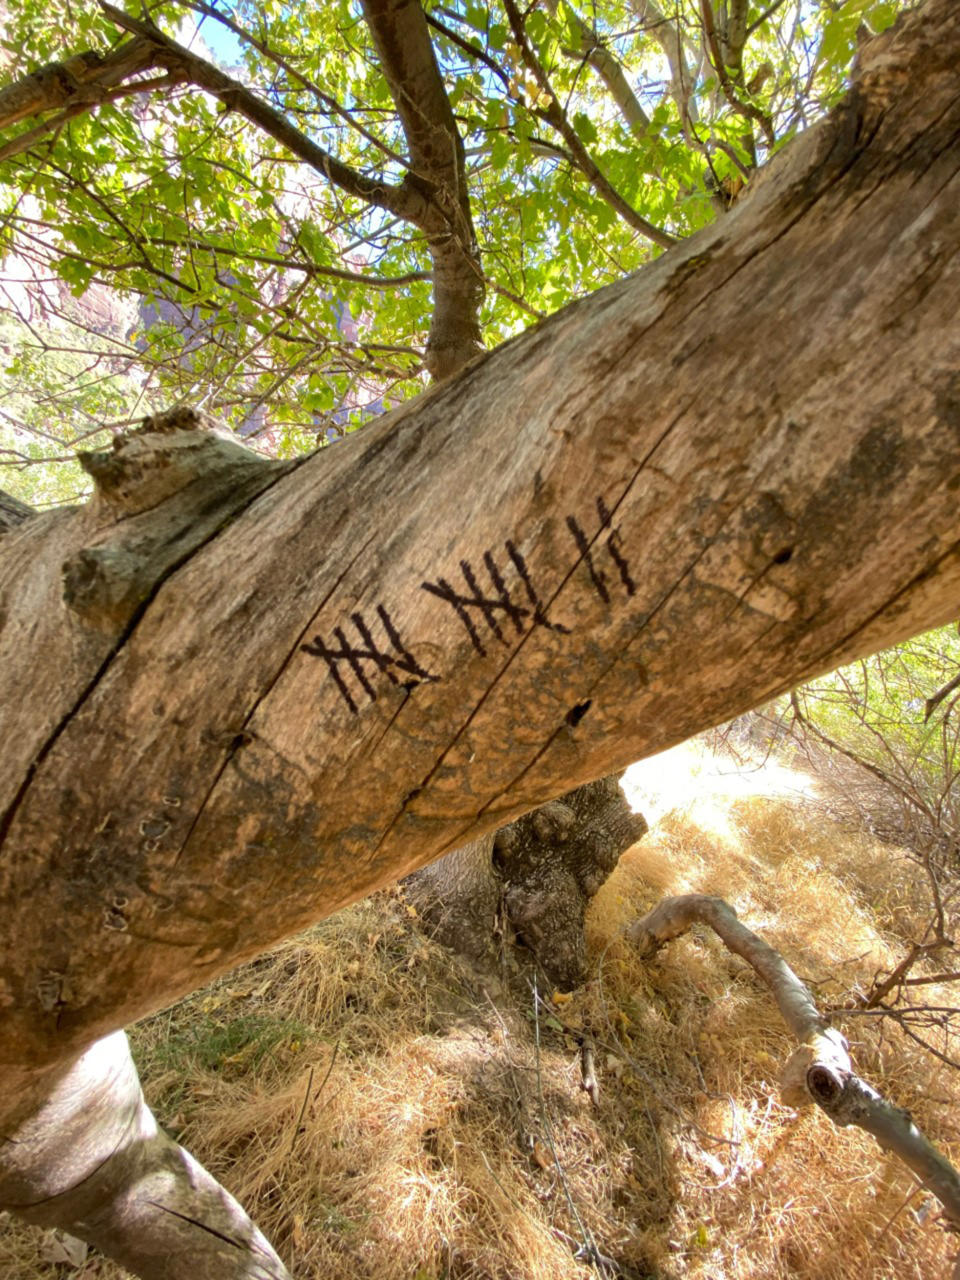 Holly Courtier kept track of the days with a Sharpie and a tree branch after entering Zion National Park without a cell phone or functioning watch, her sister said.  (Family of Holly Courtier)